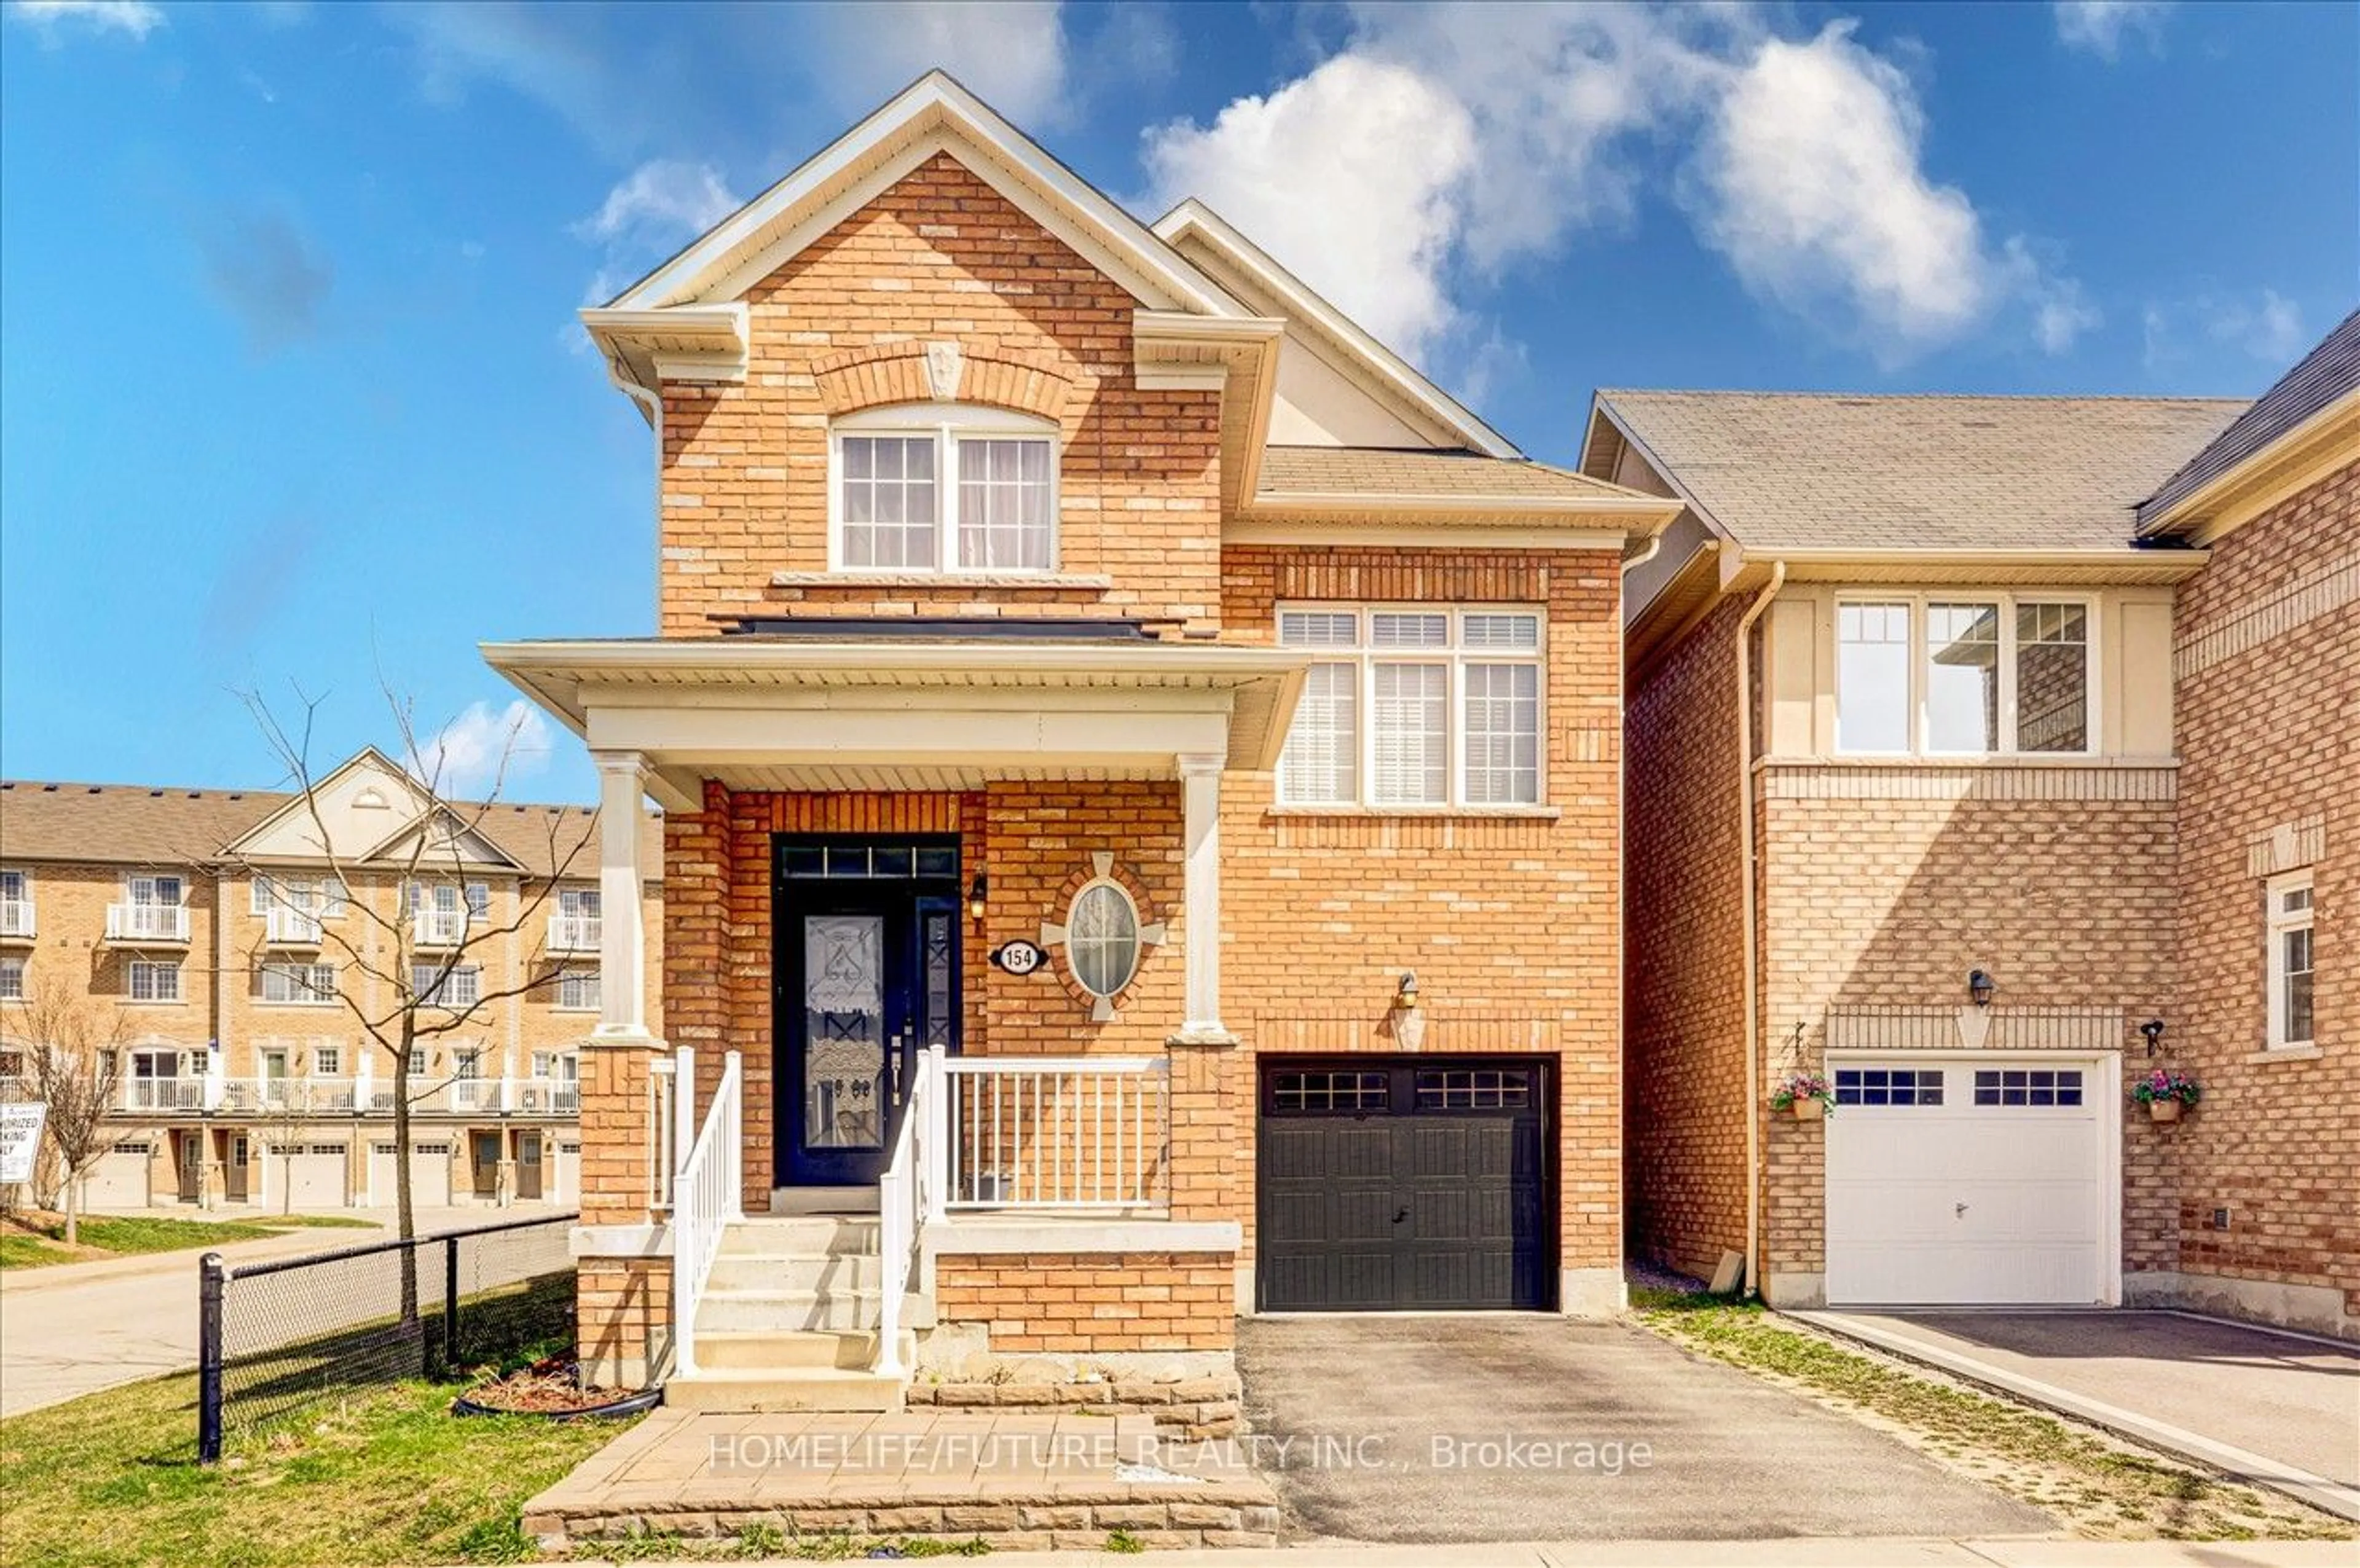 Home with brick exterior material for 154 Angus Dr, Ajax Ontario L1S 5G8